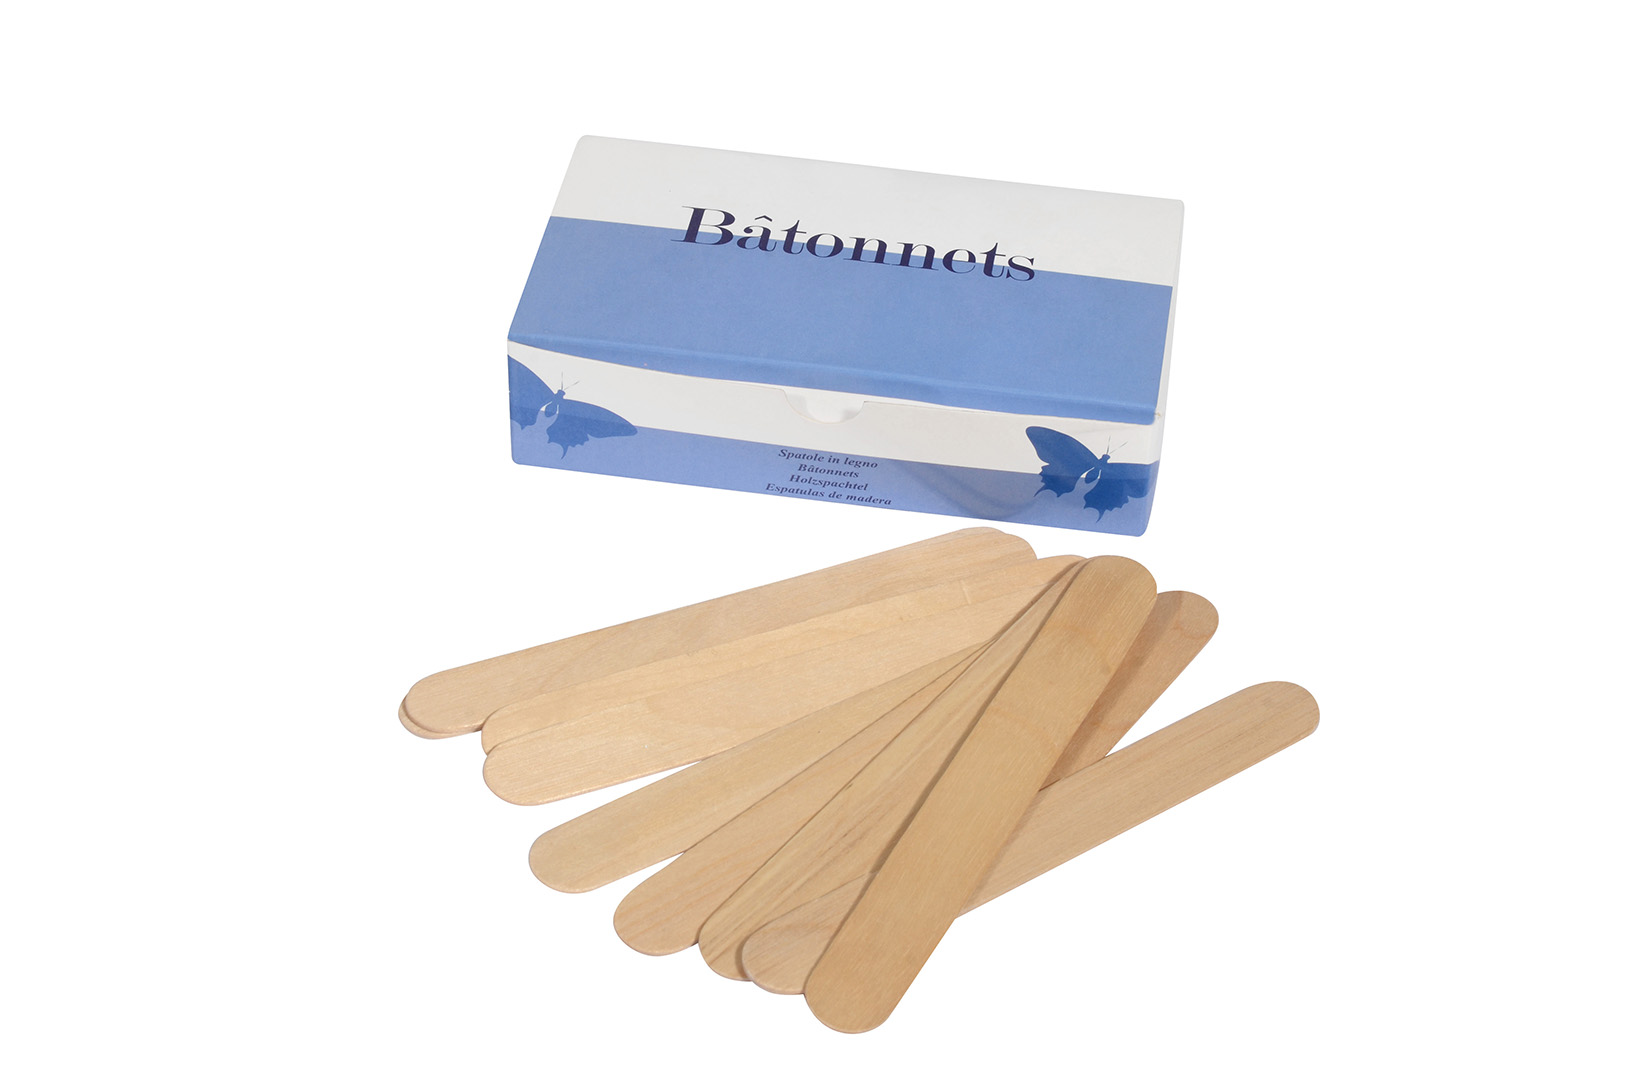 SPLG - High quality smooth wooden spatula, 100 pieces box